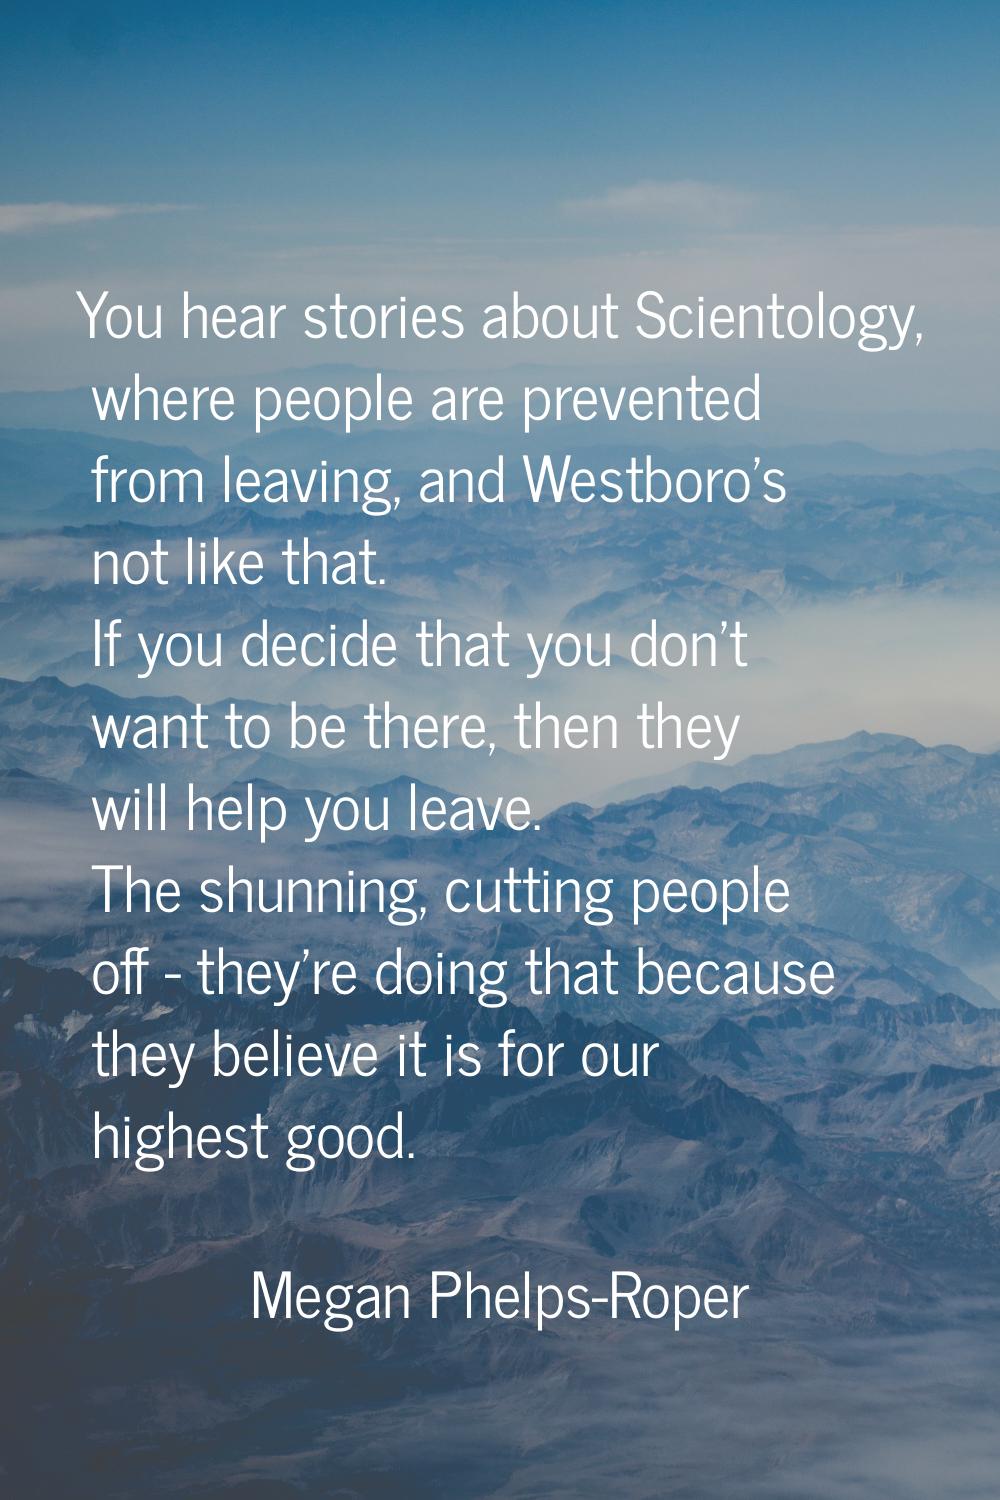 You hear stories about Scientology, where people are prevented from leaving, and Westboro's not lik